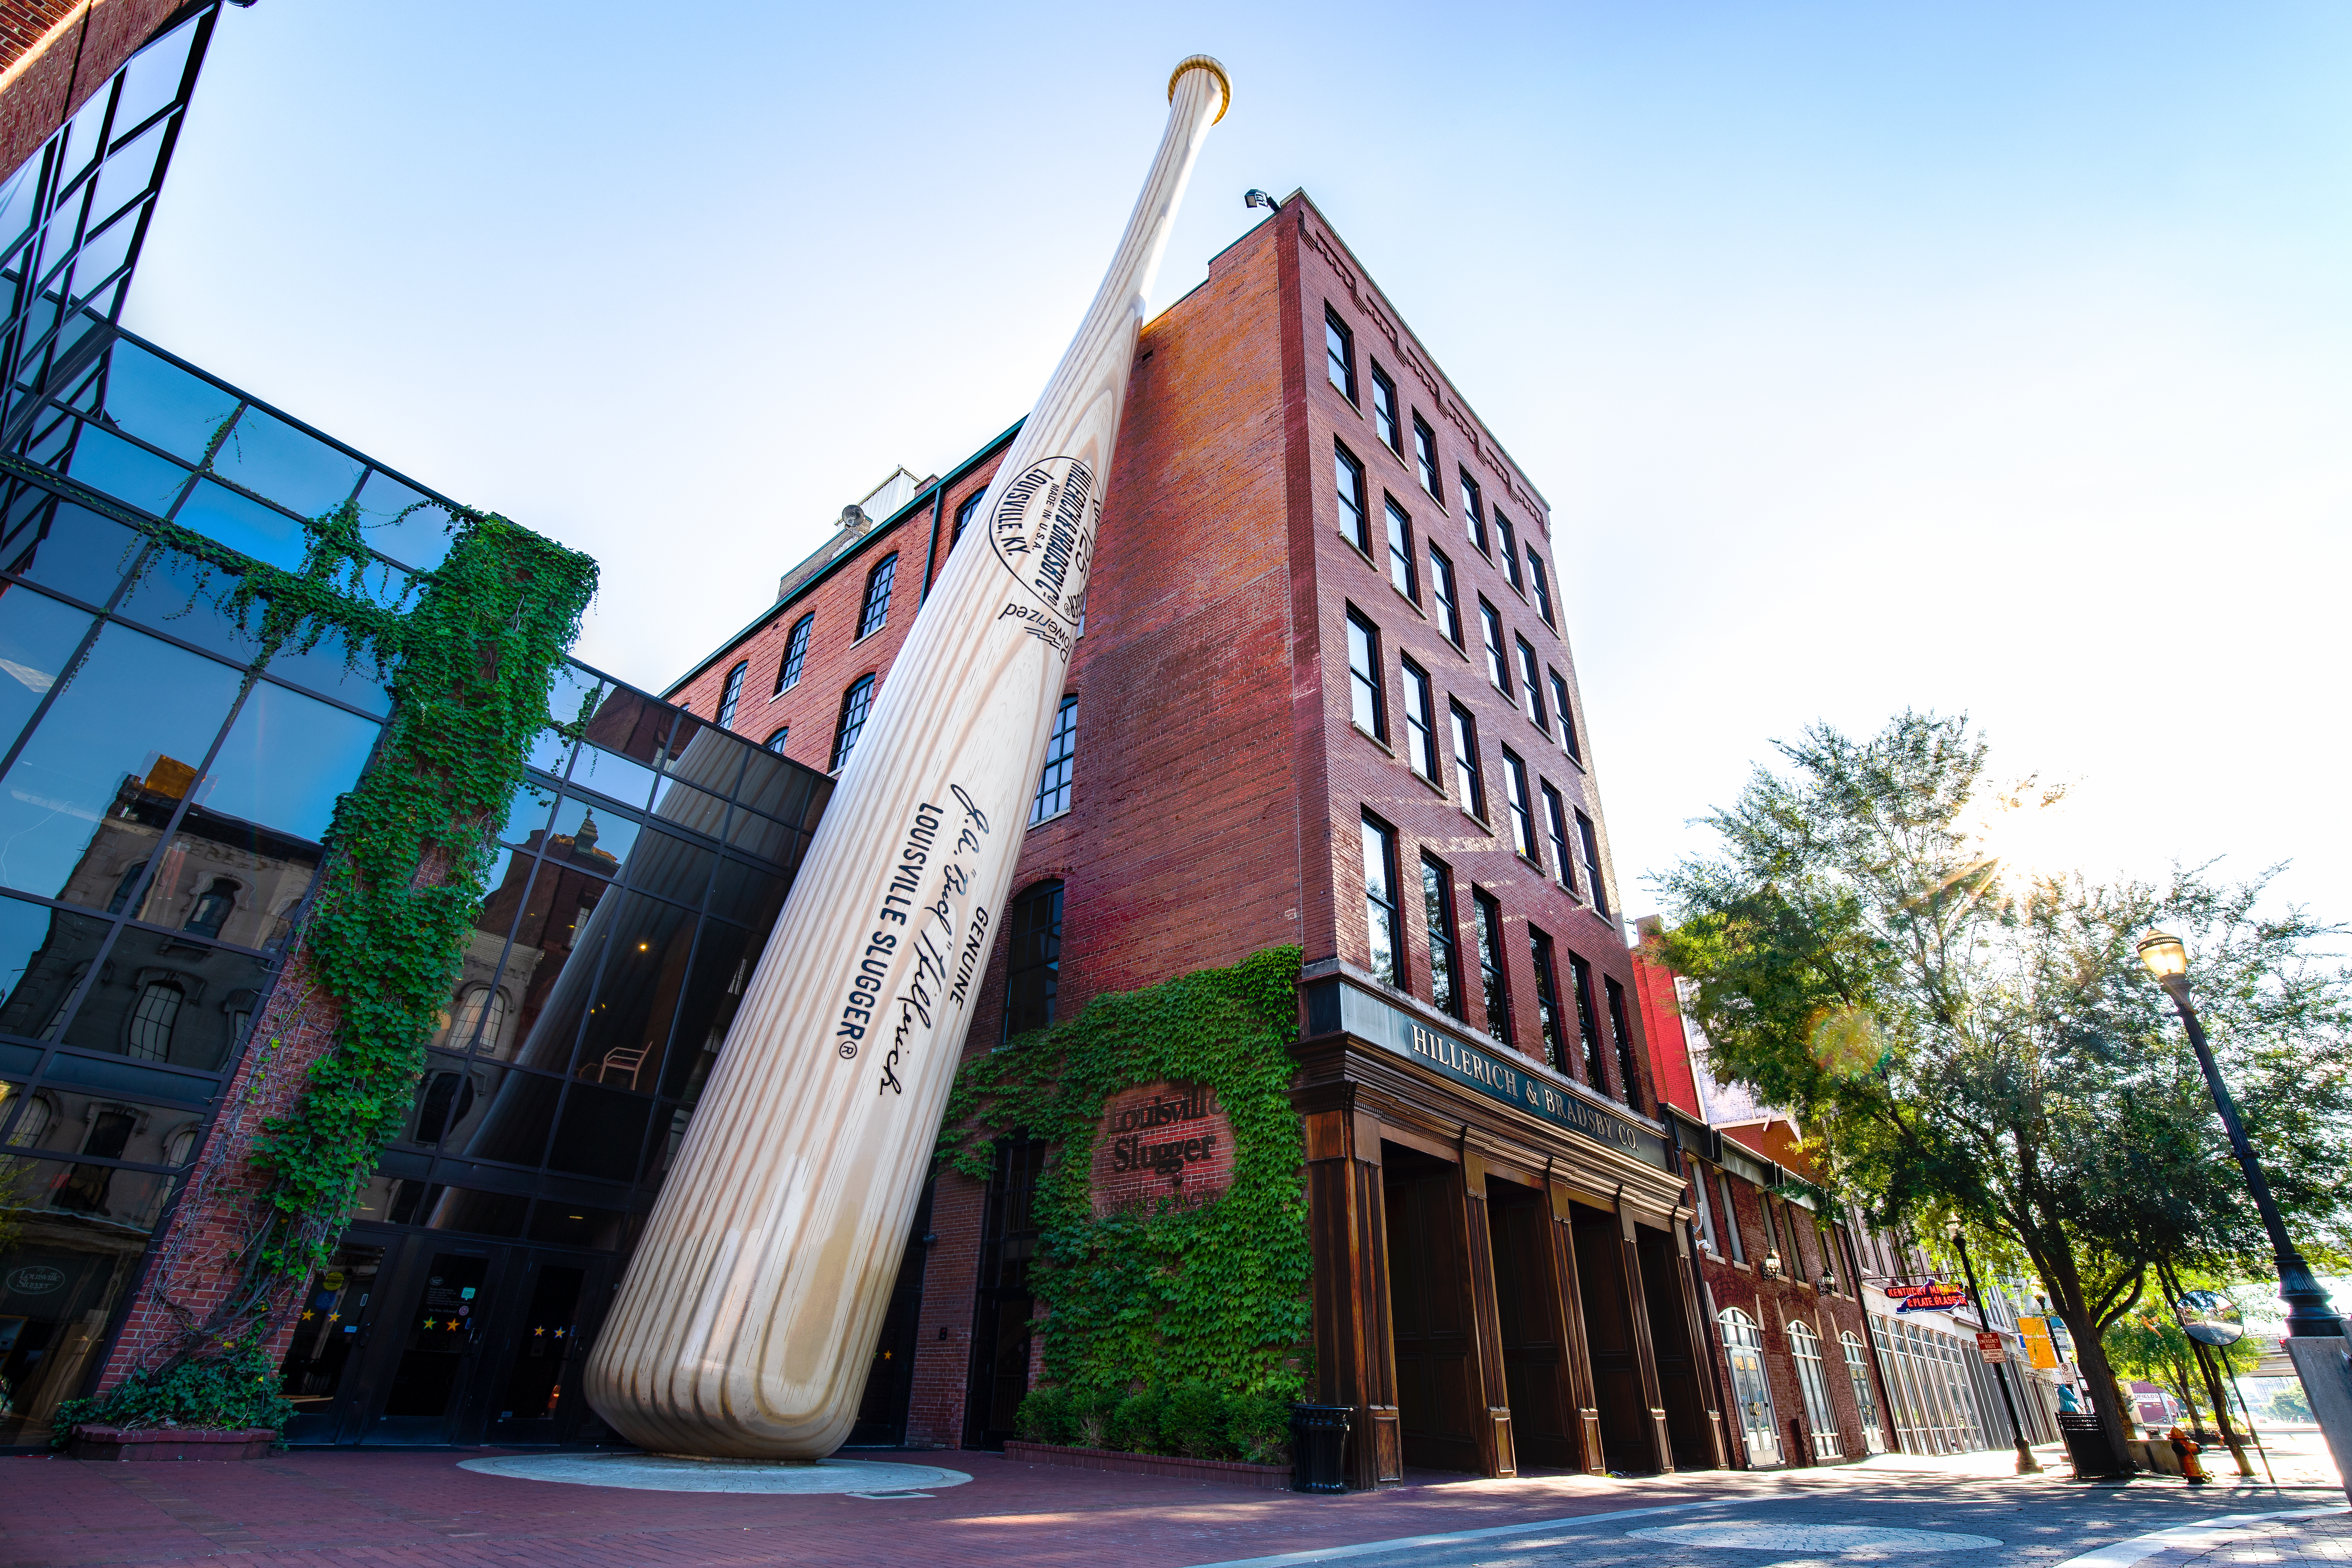 Must-See Museums During a Road Trip in Louisville - Louisville Slugger Museum